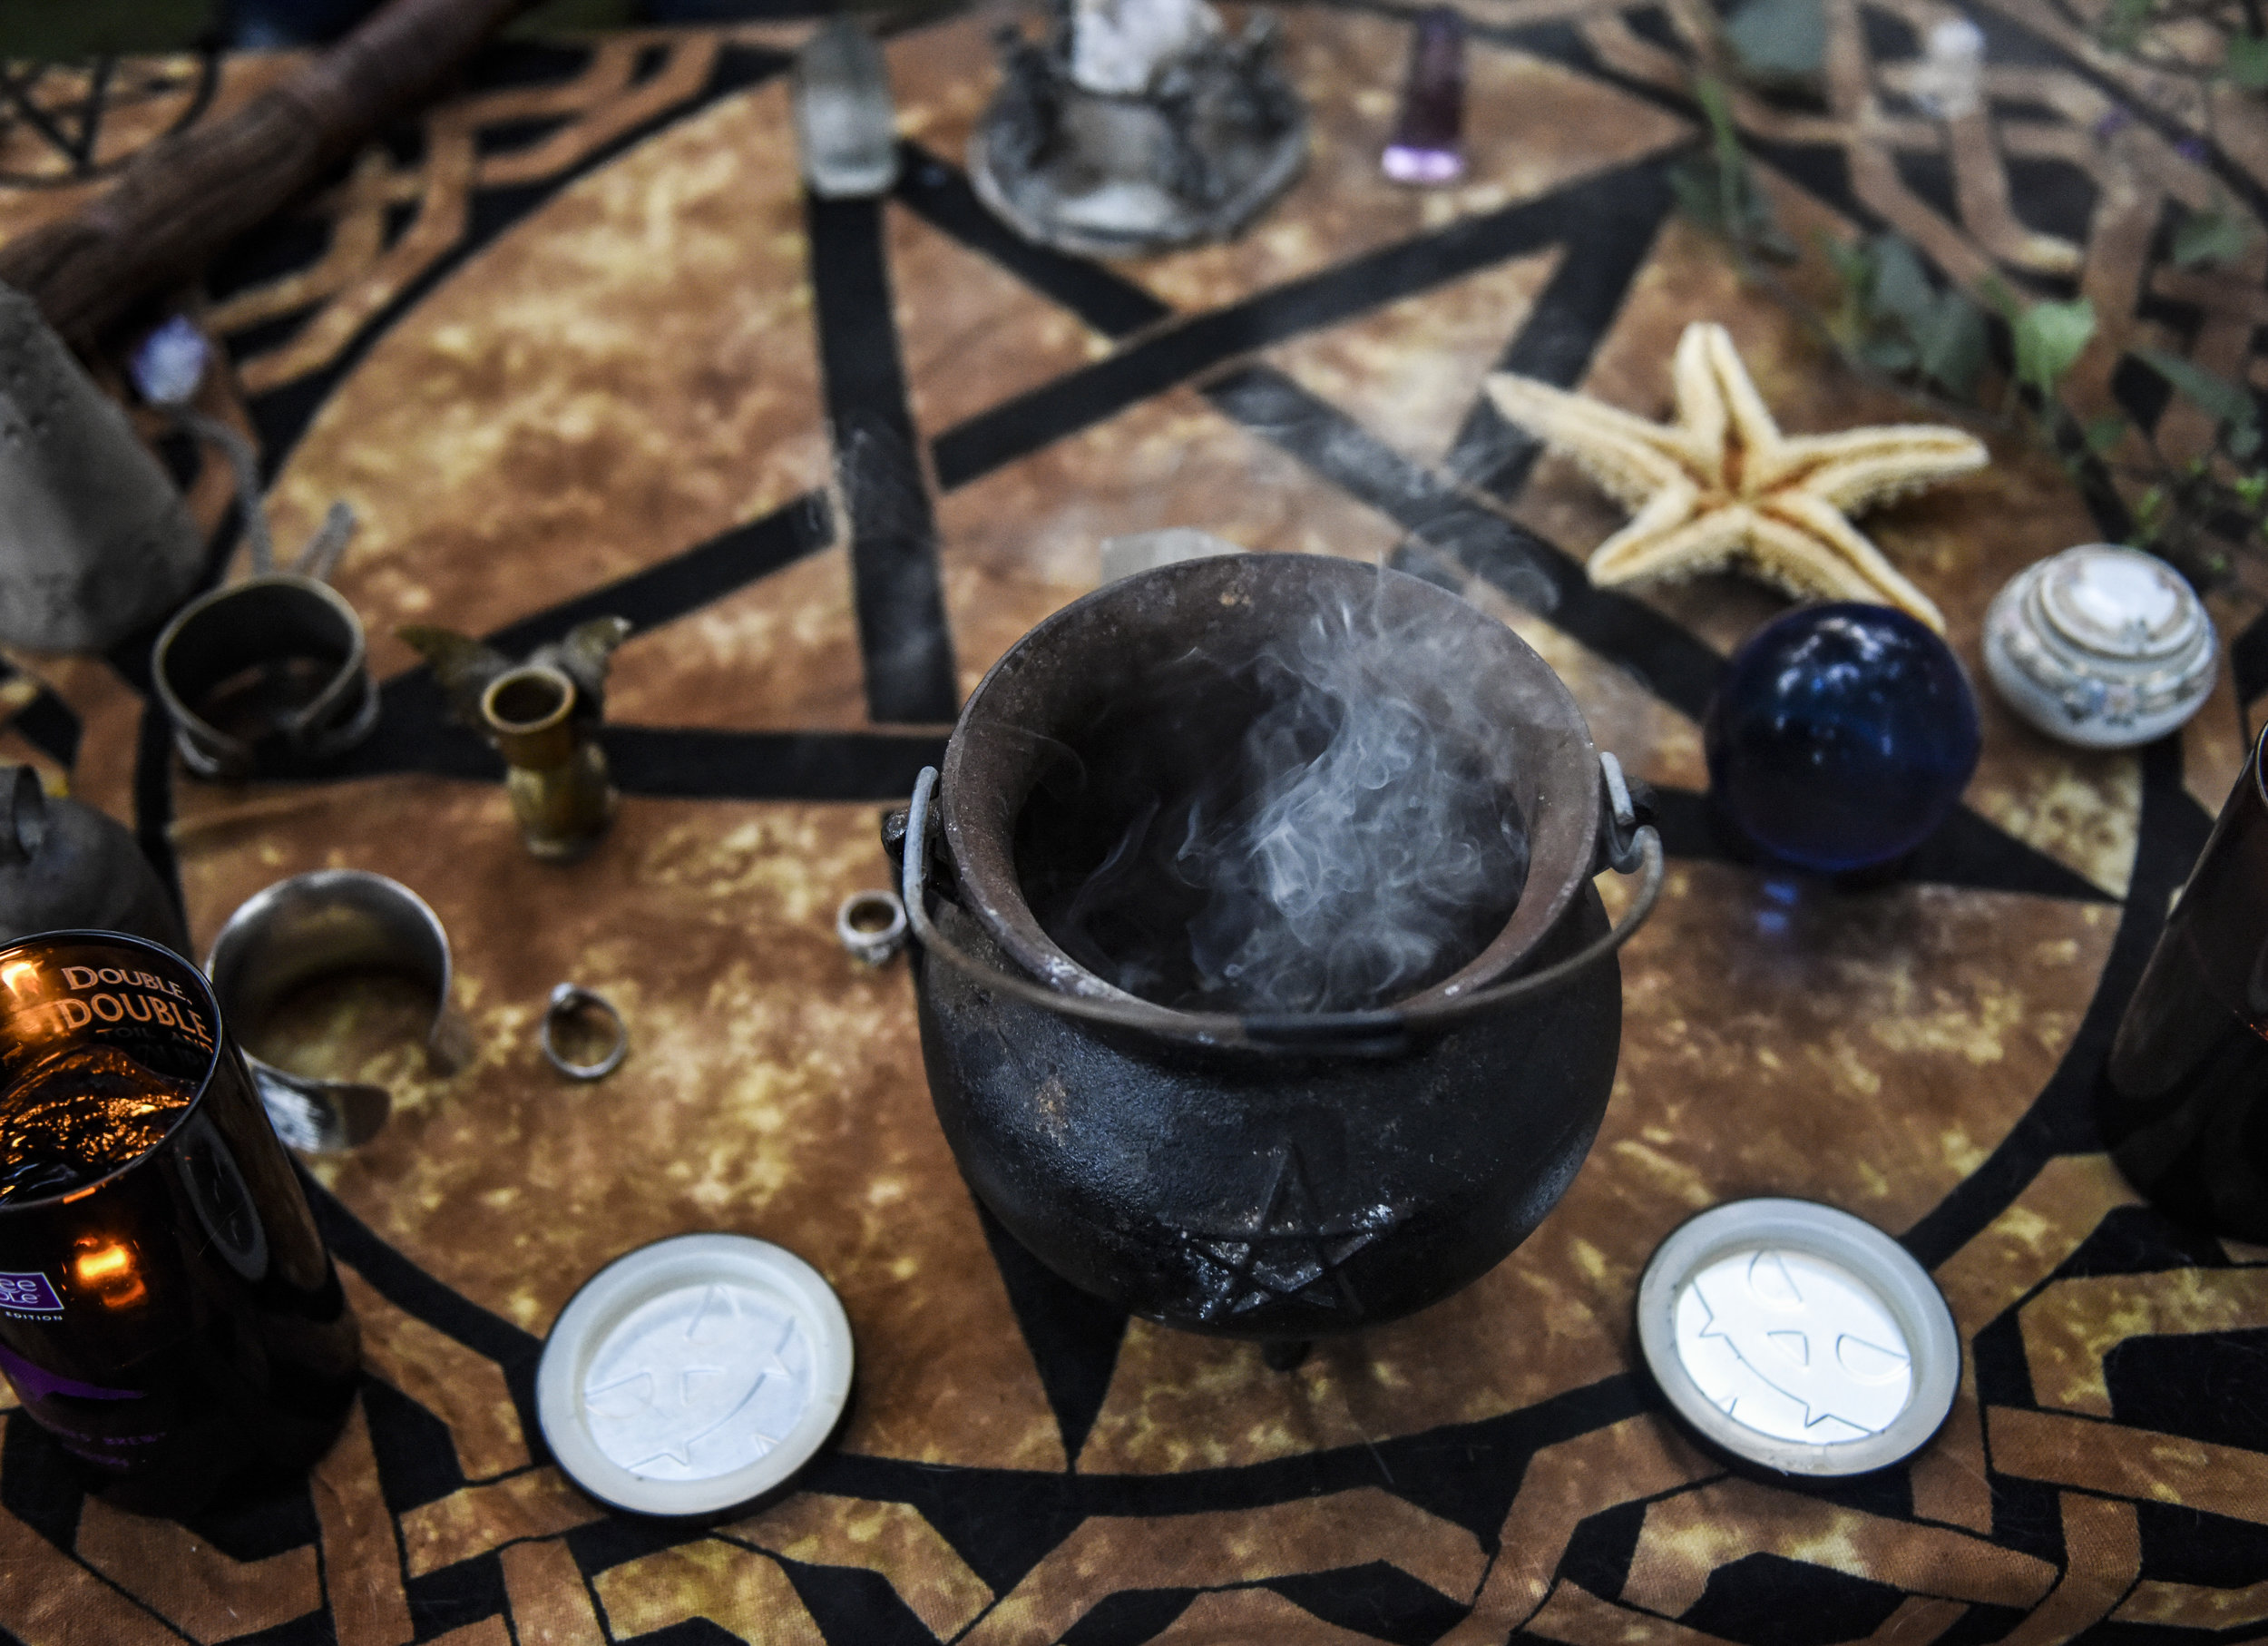  Local witch Jessica's cauldron rest on a table while it burns sage and other herbs while Crafting witches meaningful items are placed on the table to be cleansed, Friday, Aug. 17, 2018. This was before the cleansing of a home to heal a close friend 